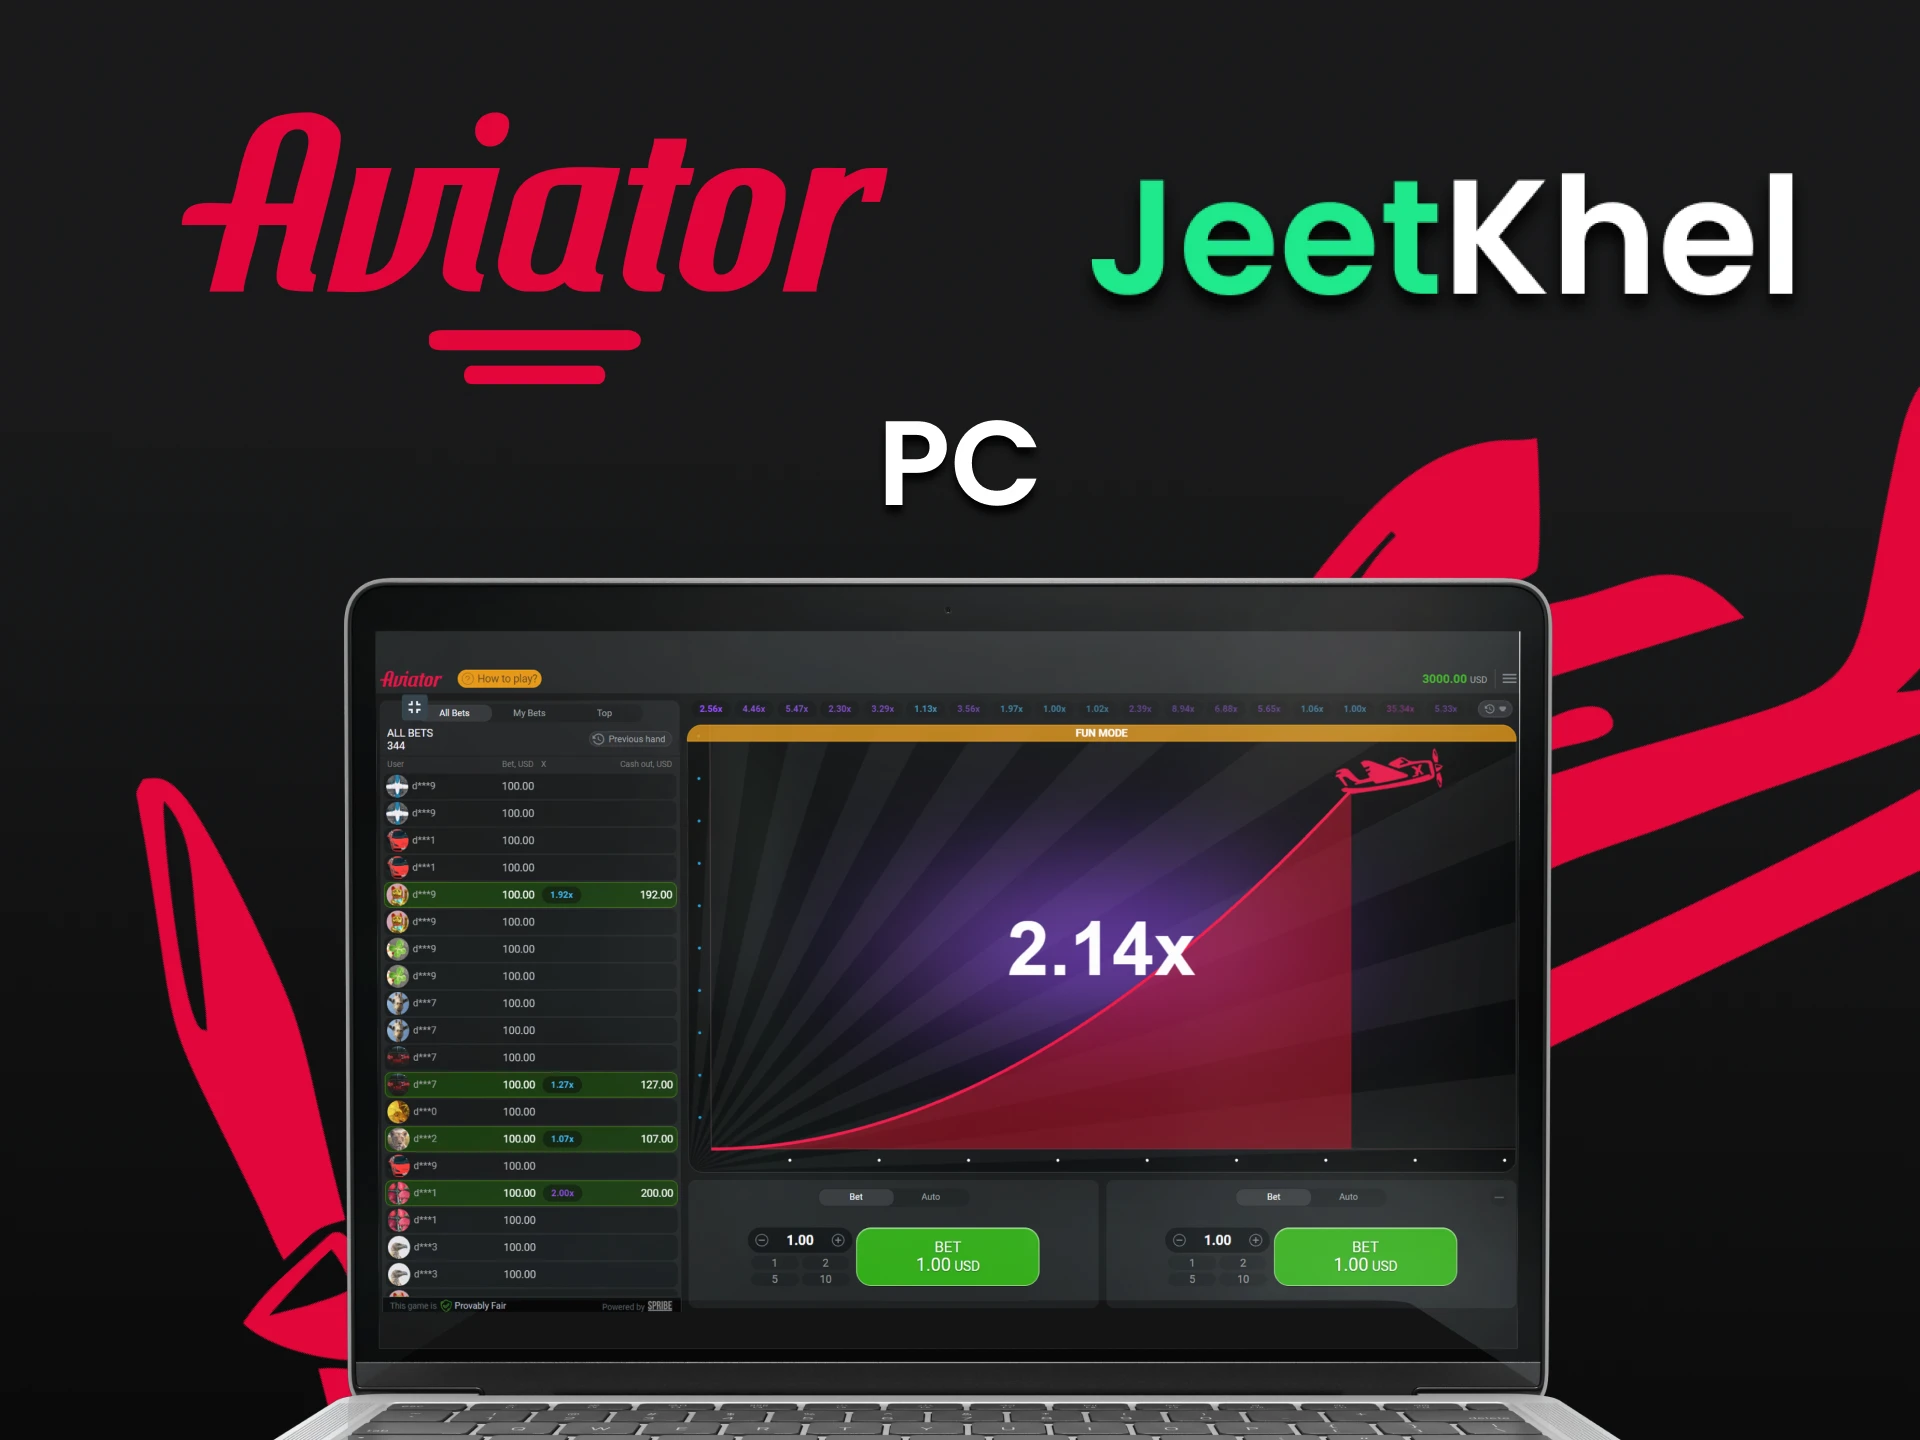 To play Aviator on JeetKhel, you can use your PC.